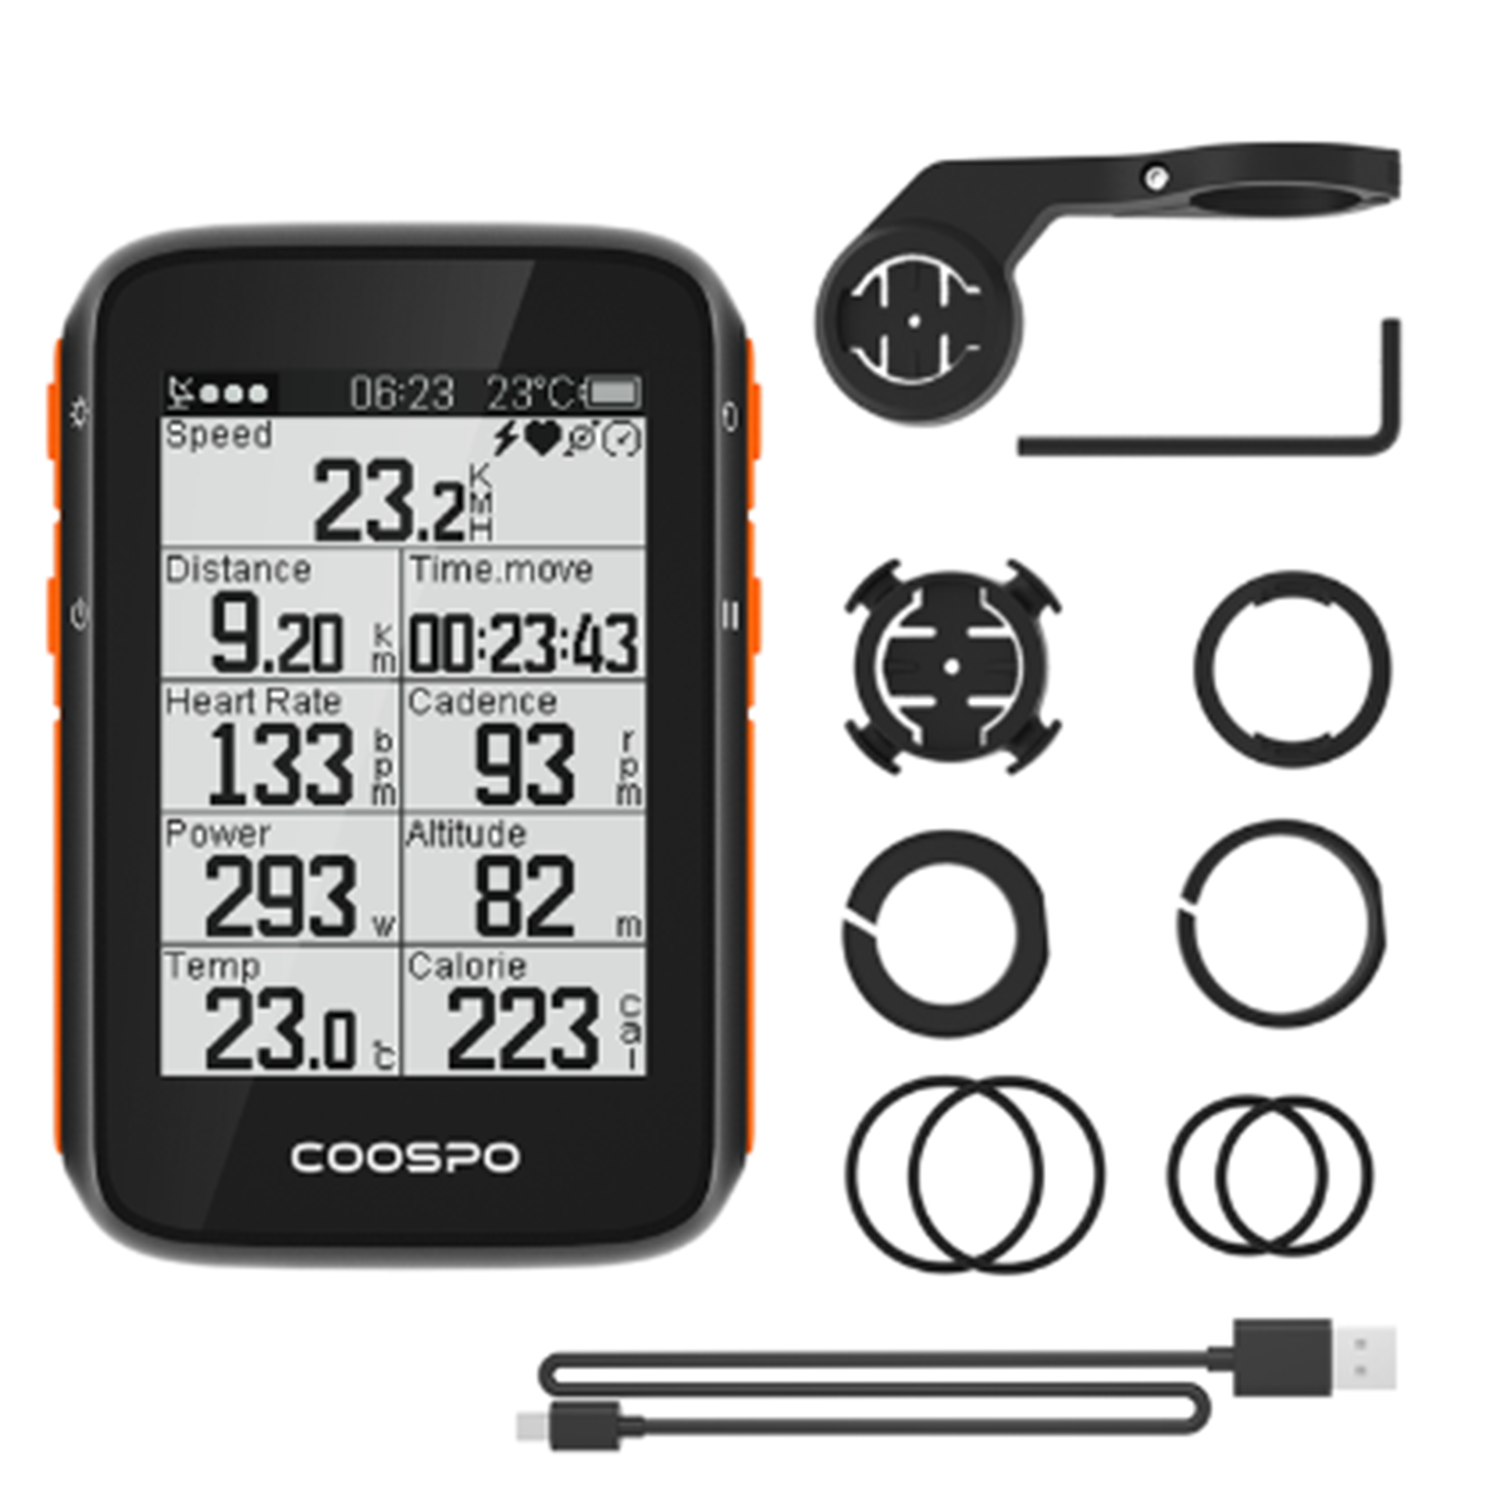 best price,coospo,bc200,wireless,bicycle,computer,gps,discount